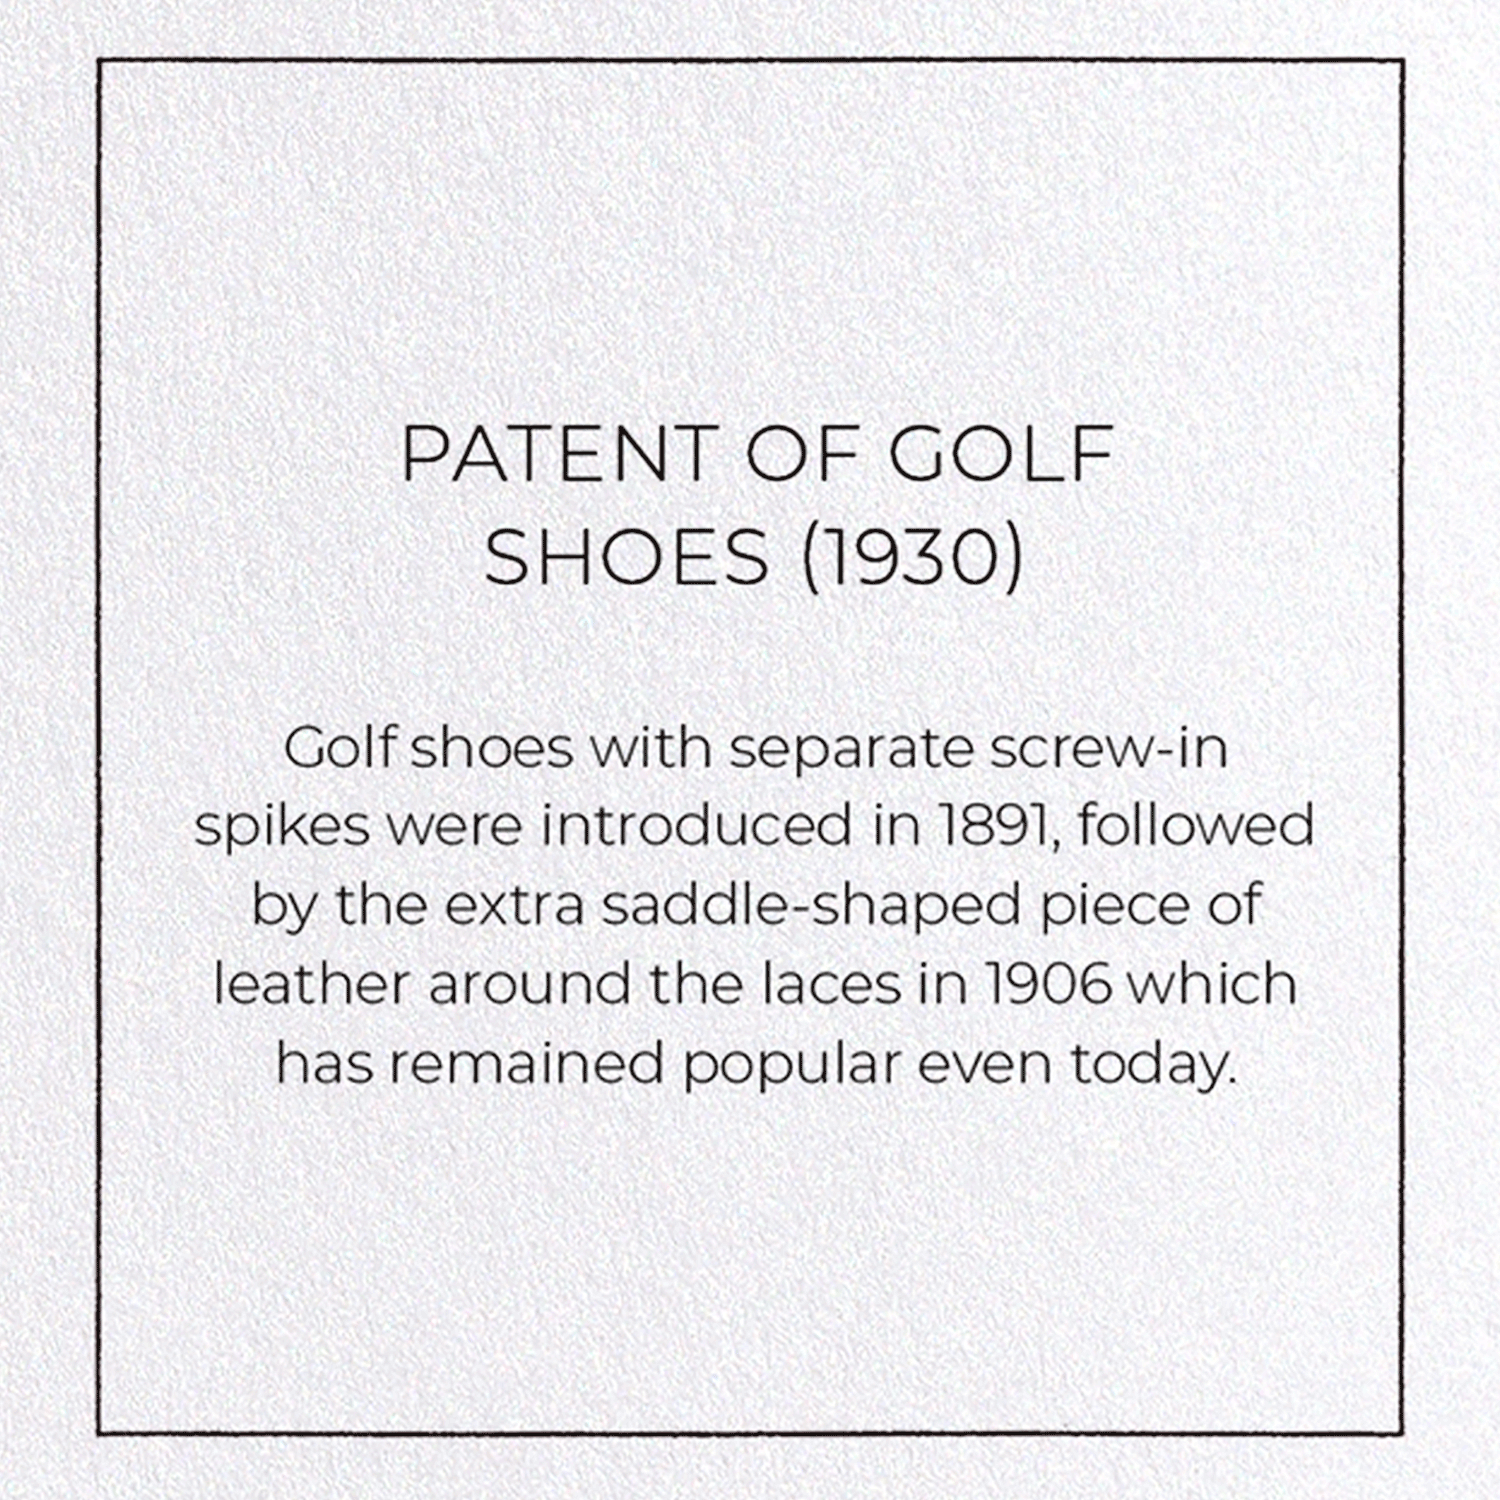 PATENT OF GOLF SHOES (1930): Patent Greeting Card